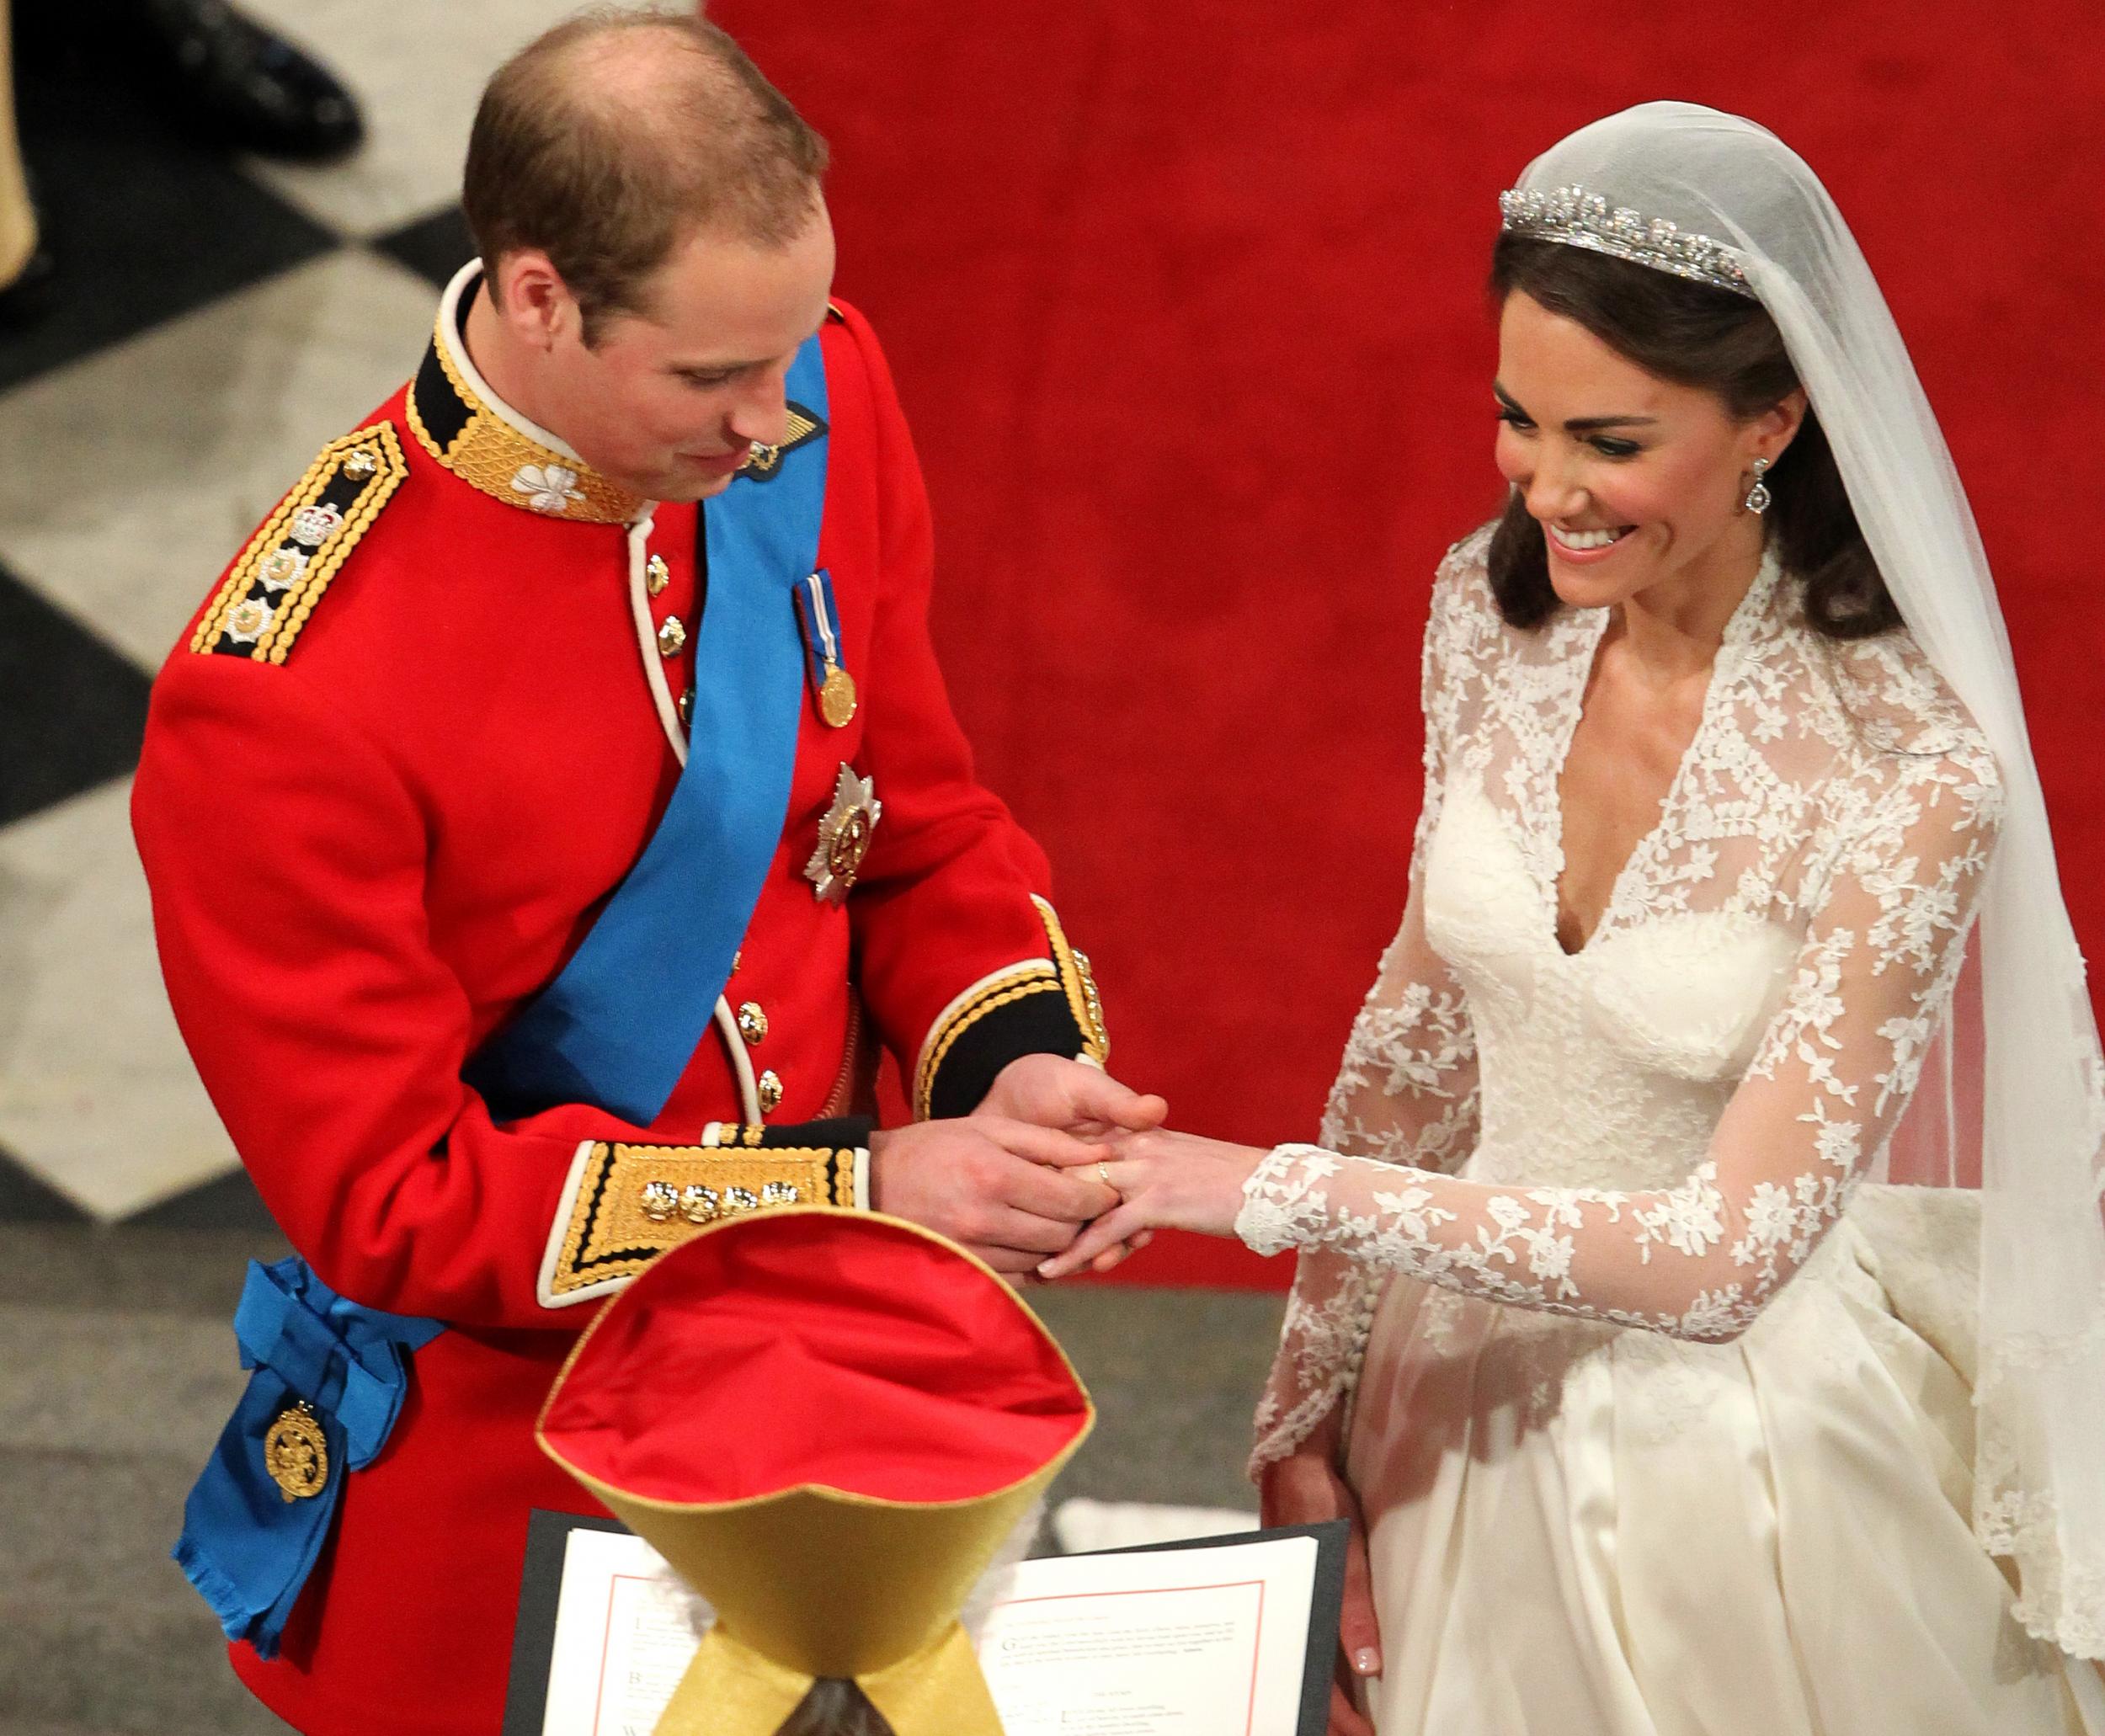 The Duchess of Cambridge smiled as the Duke of Cambridge placed the wedding ring on her finger during their wedding ceremony